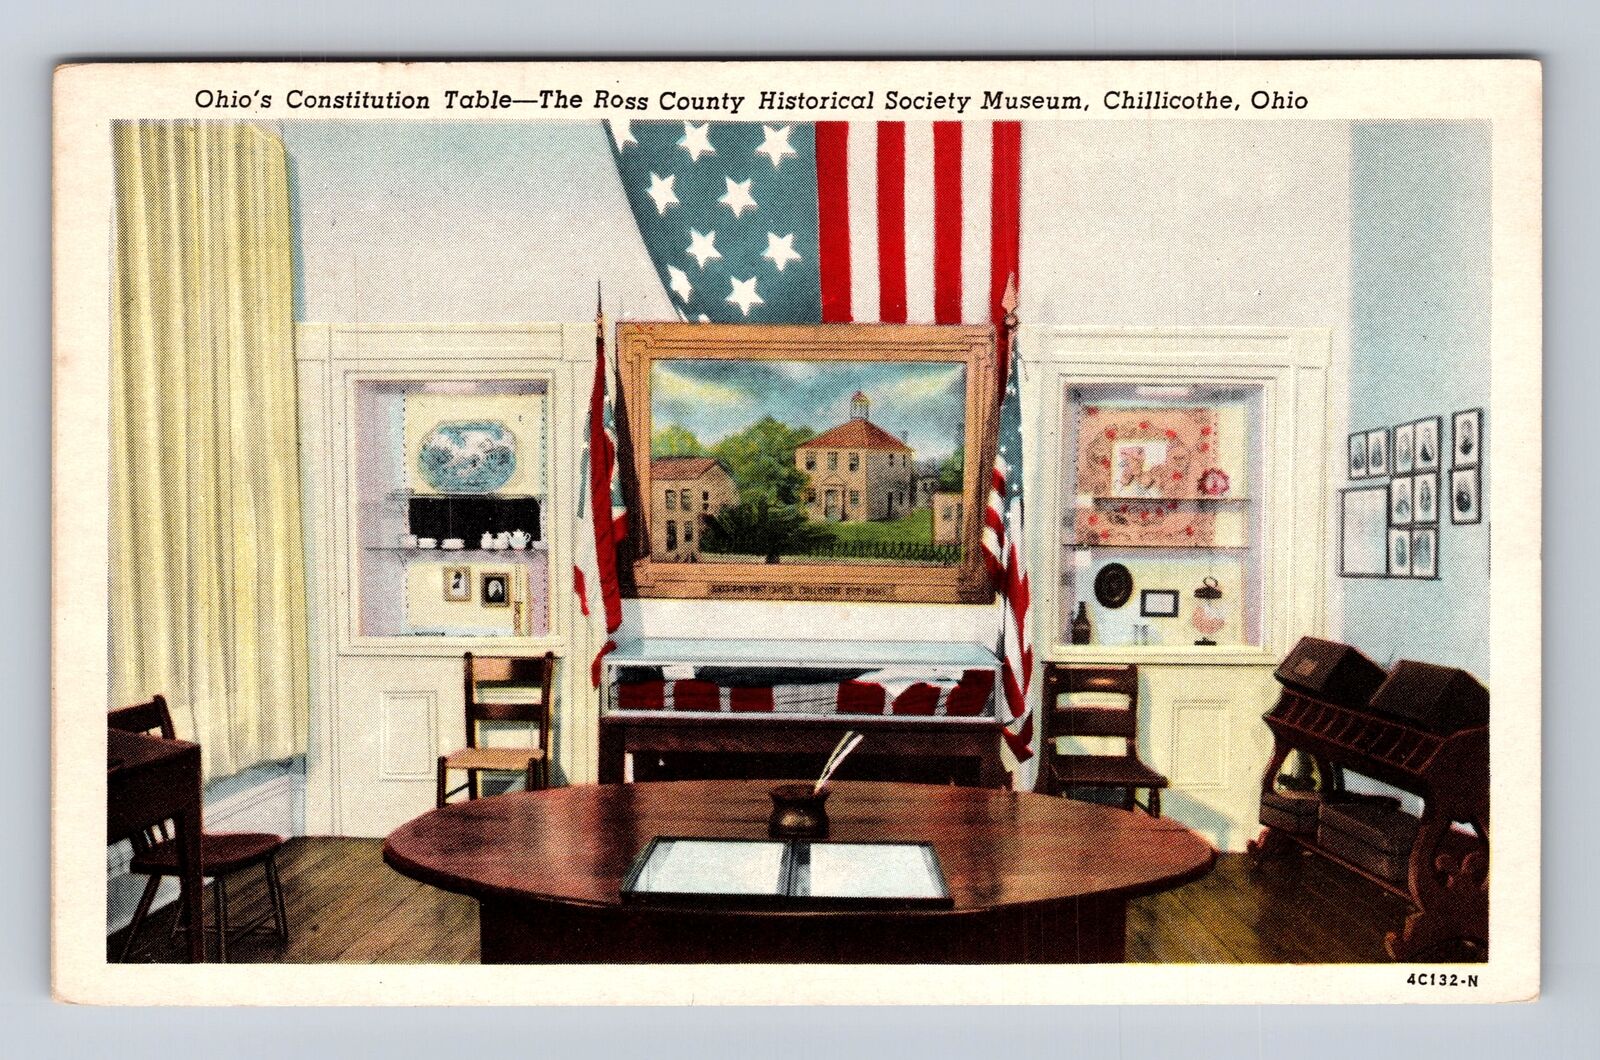 Chillicothe OH-Ohio, Constitution Table, Historical Society, Vintage Postcard